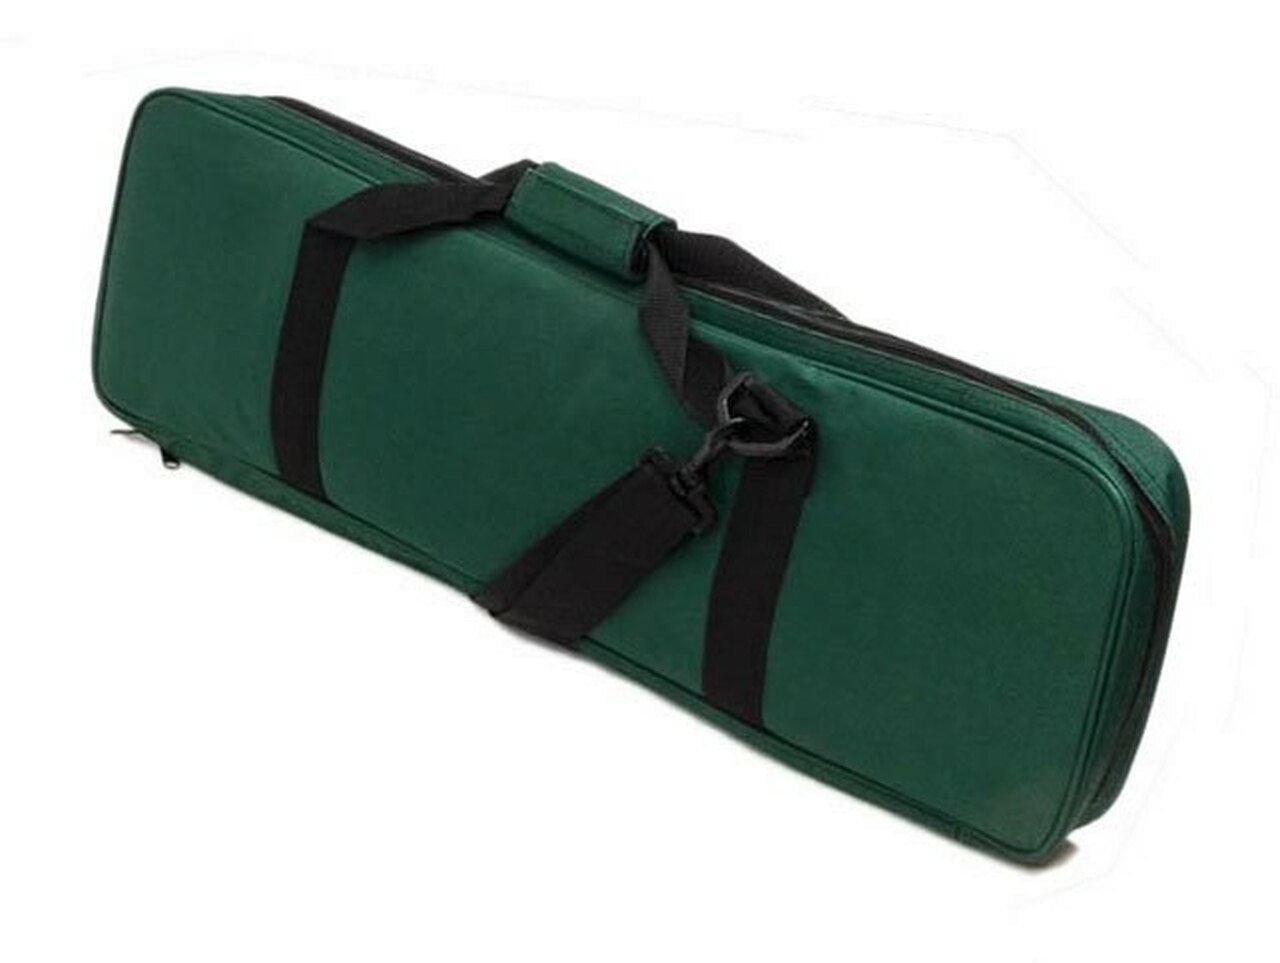 01. Carry-all Tournament Chess Bag (3 colors)